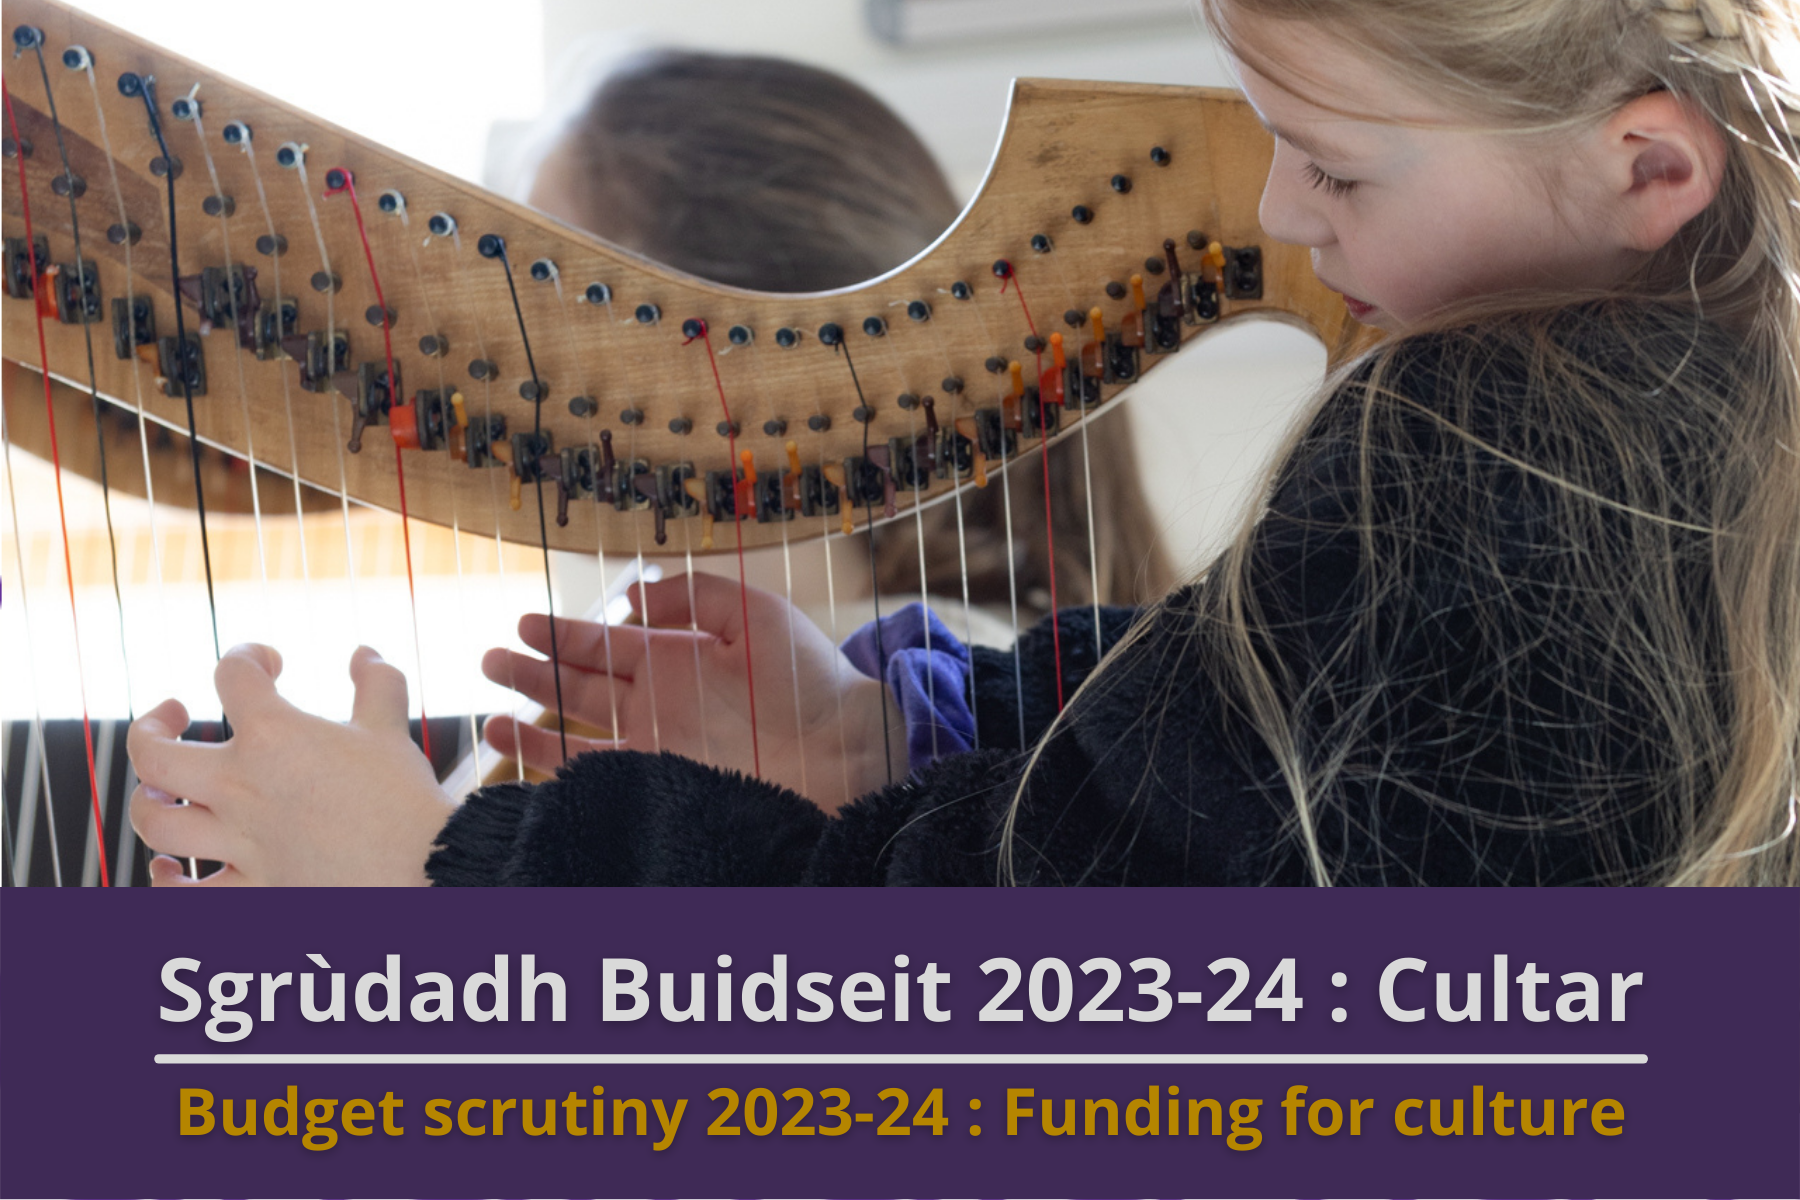 Budget scrutiny 2023-24: Funding for culture